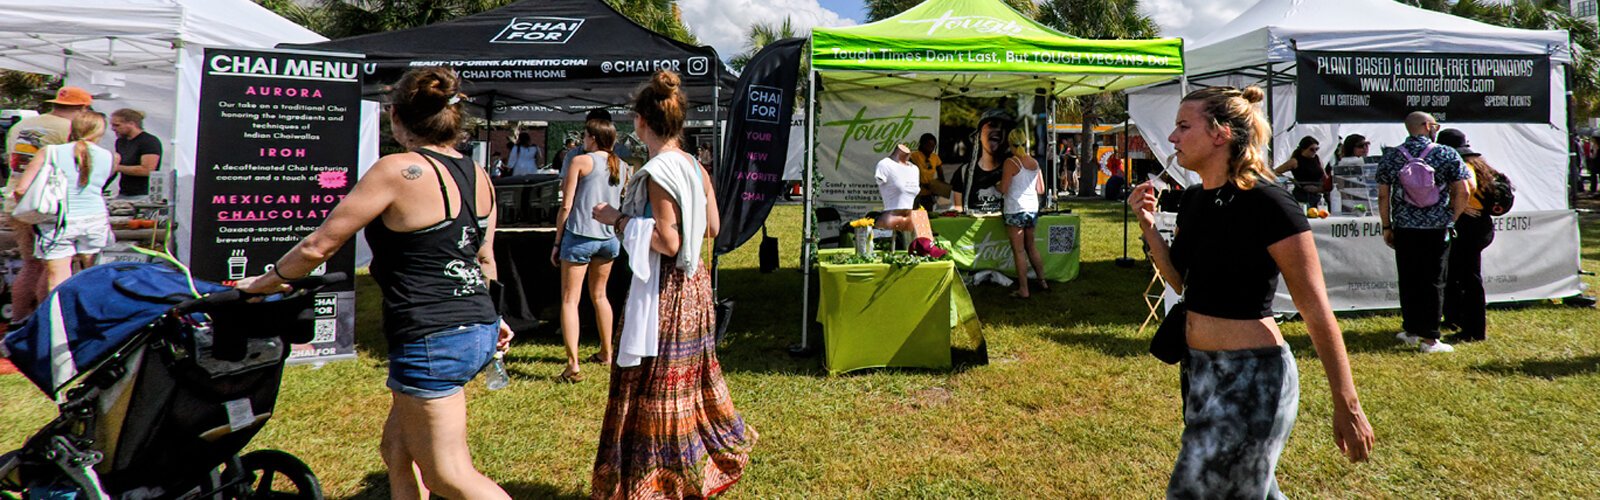 Tampa Bay VegFest featured more than 140 veg-friendly vendors and exhibitors, nationally renowned speakers, vegan food trucks, food demonstrations, live music and activities for children and families.